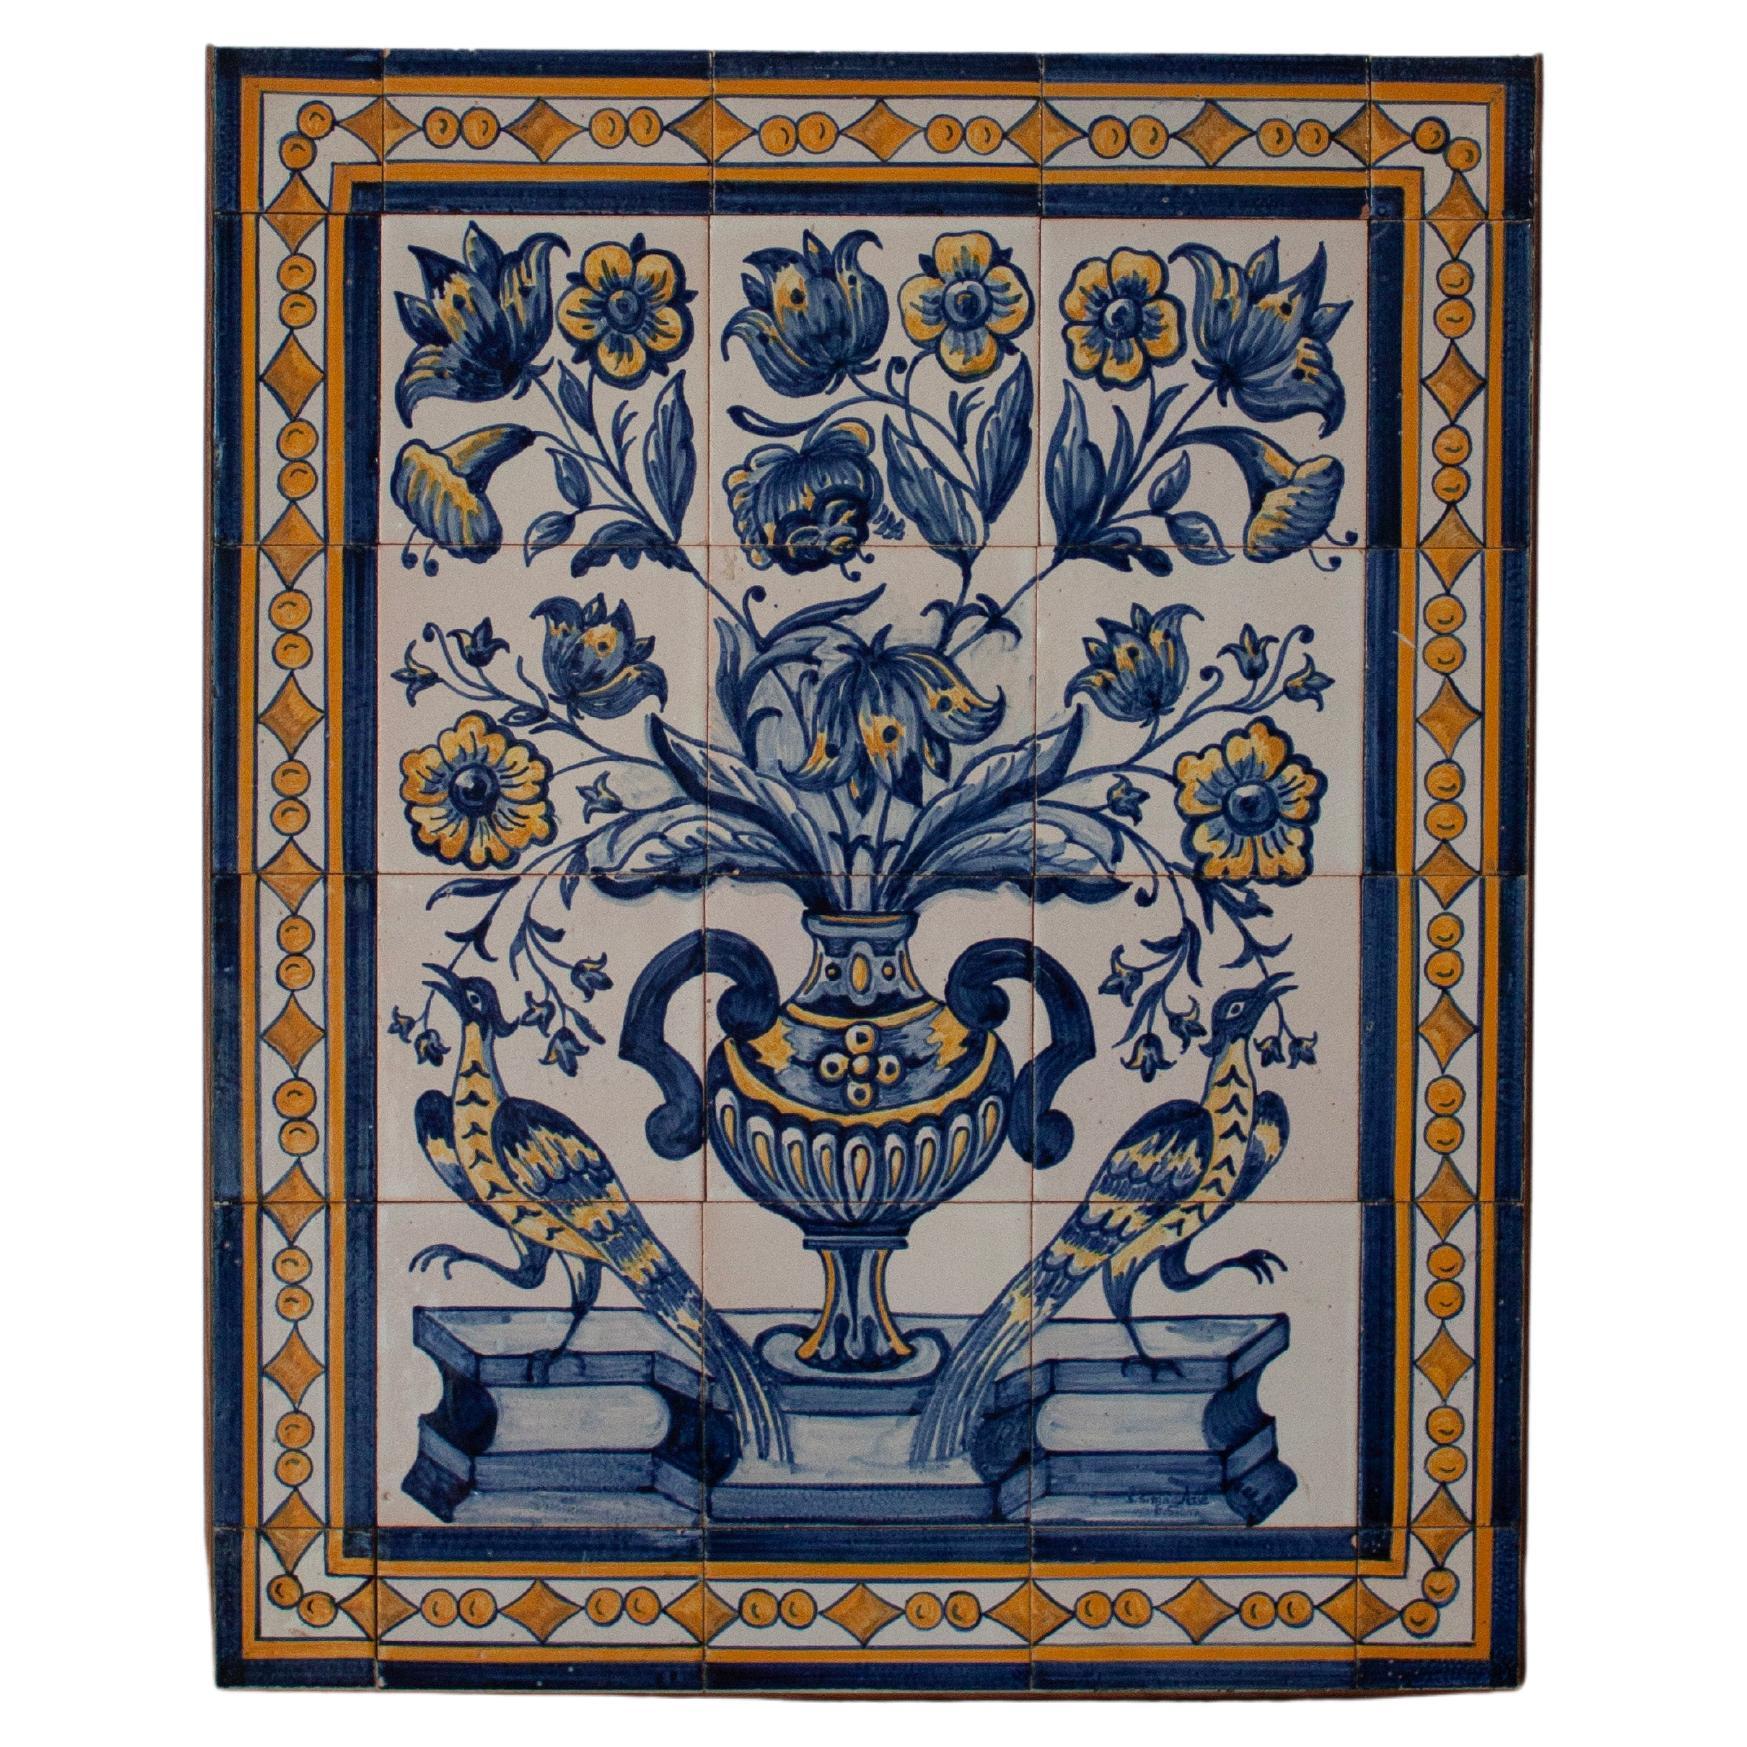 European Floral and Animal Blue and White Tiled Wall Artwork Wall Hanging  For Sale